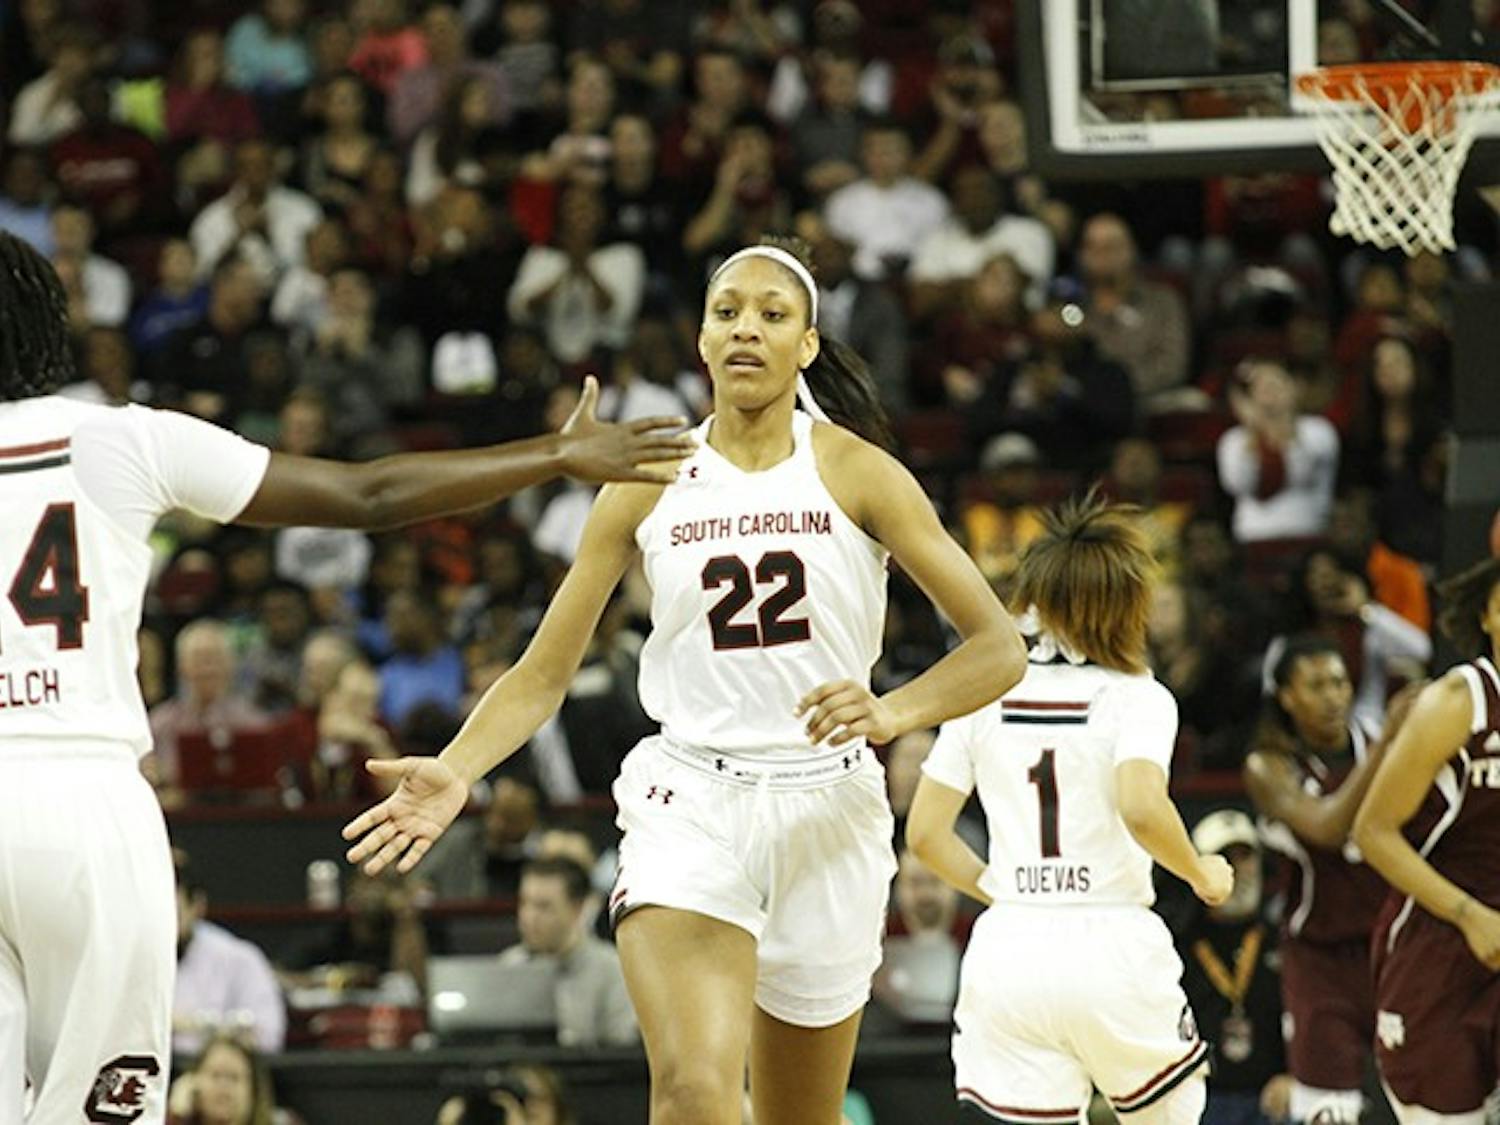 South Carolina freshman guard/forward A'ja Wilson won her record-tying fifth SEC Freshman of the Week award after scoring 26 points against LSU and 20 points against Vanderbilt. 